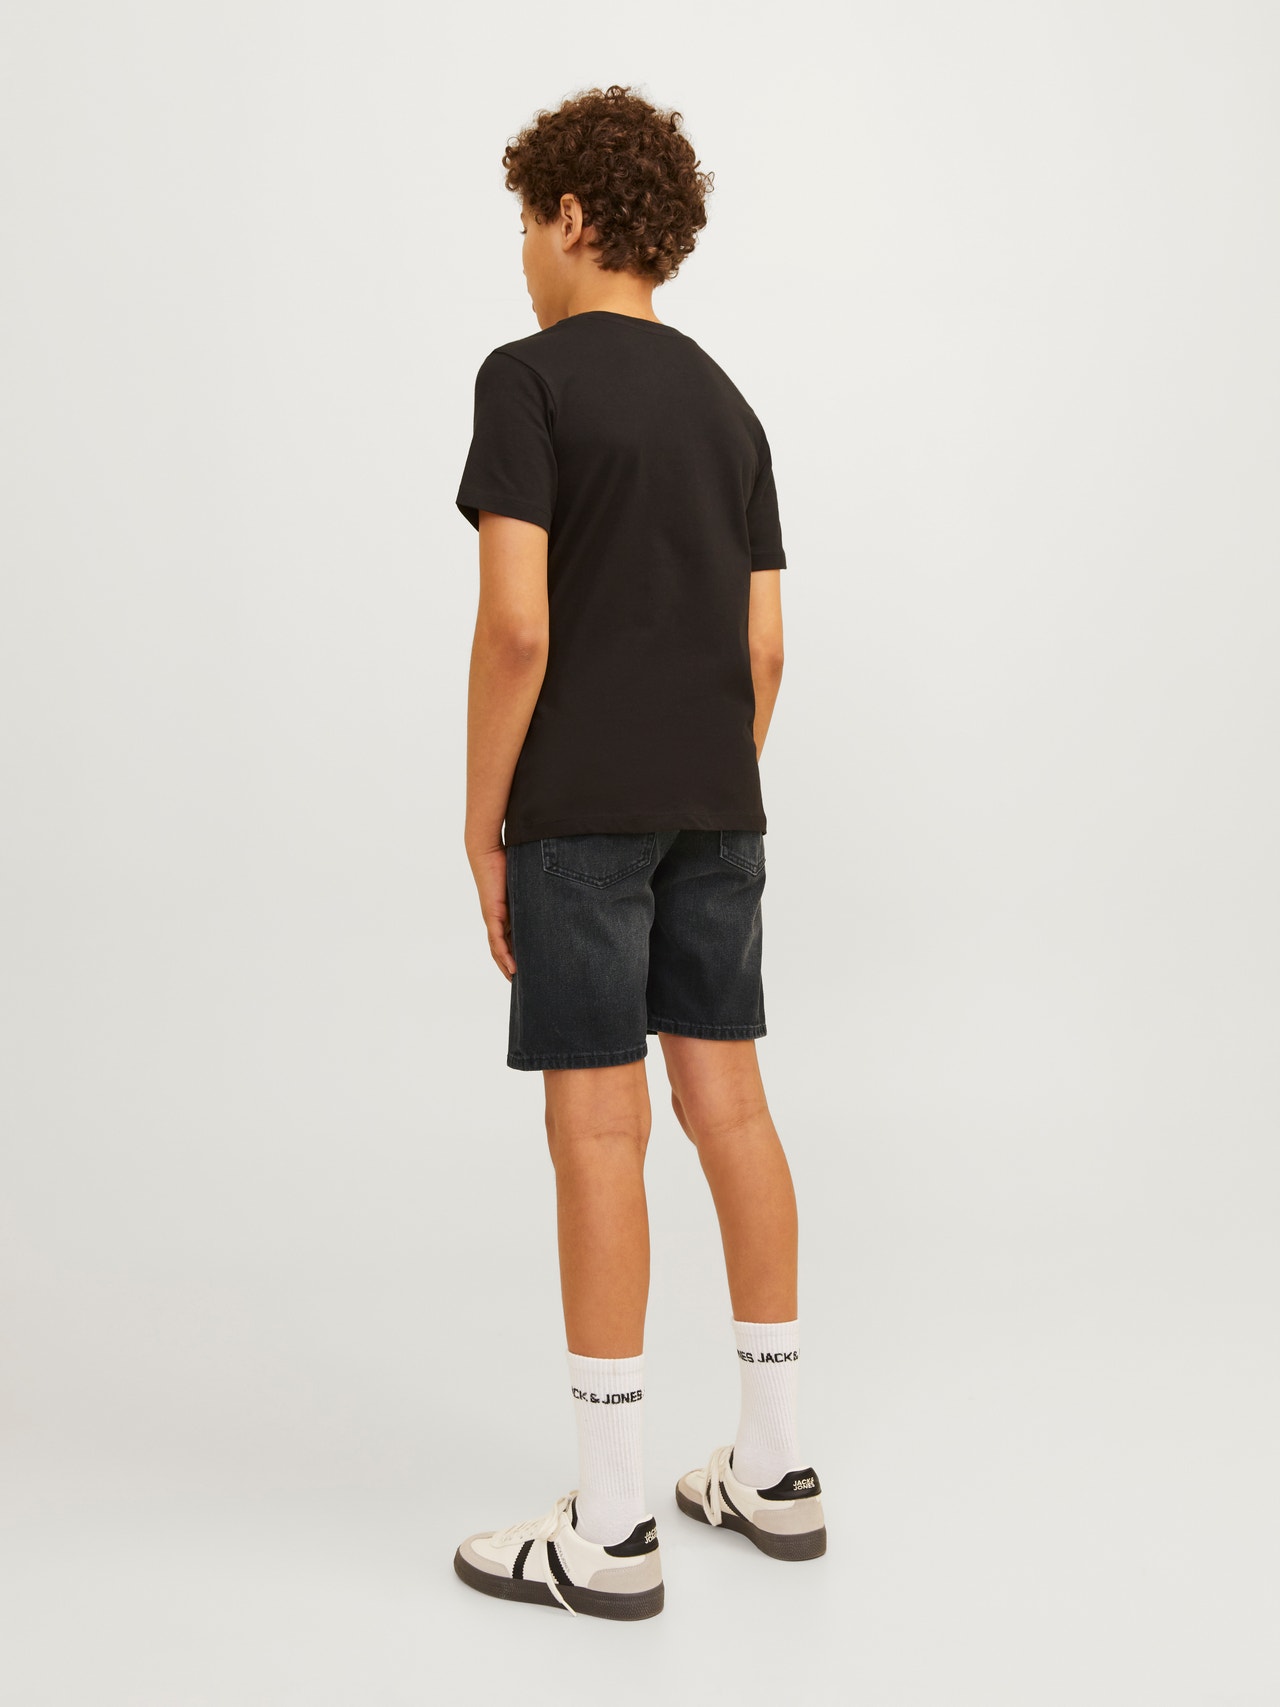 Jack & Jones Relaxed Fit Relaxed fit shorts For boys -Black Denim - 12249232